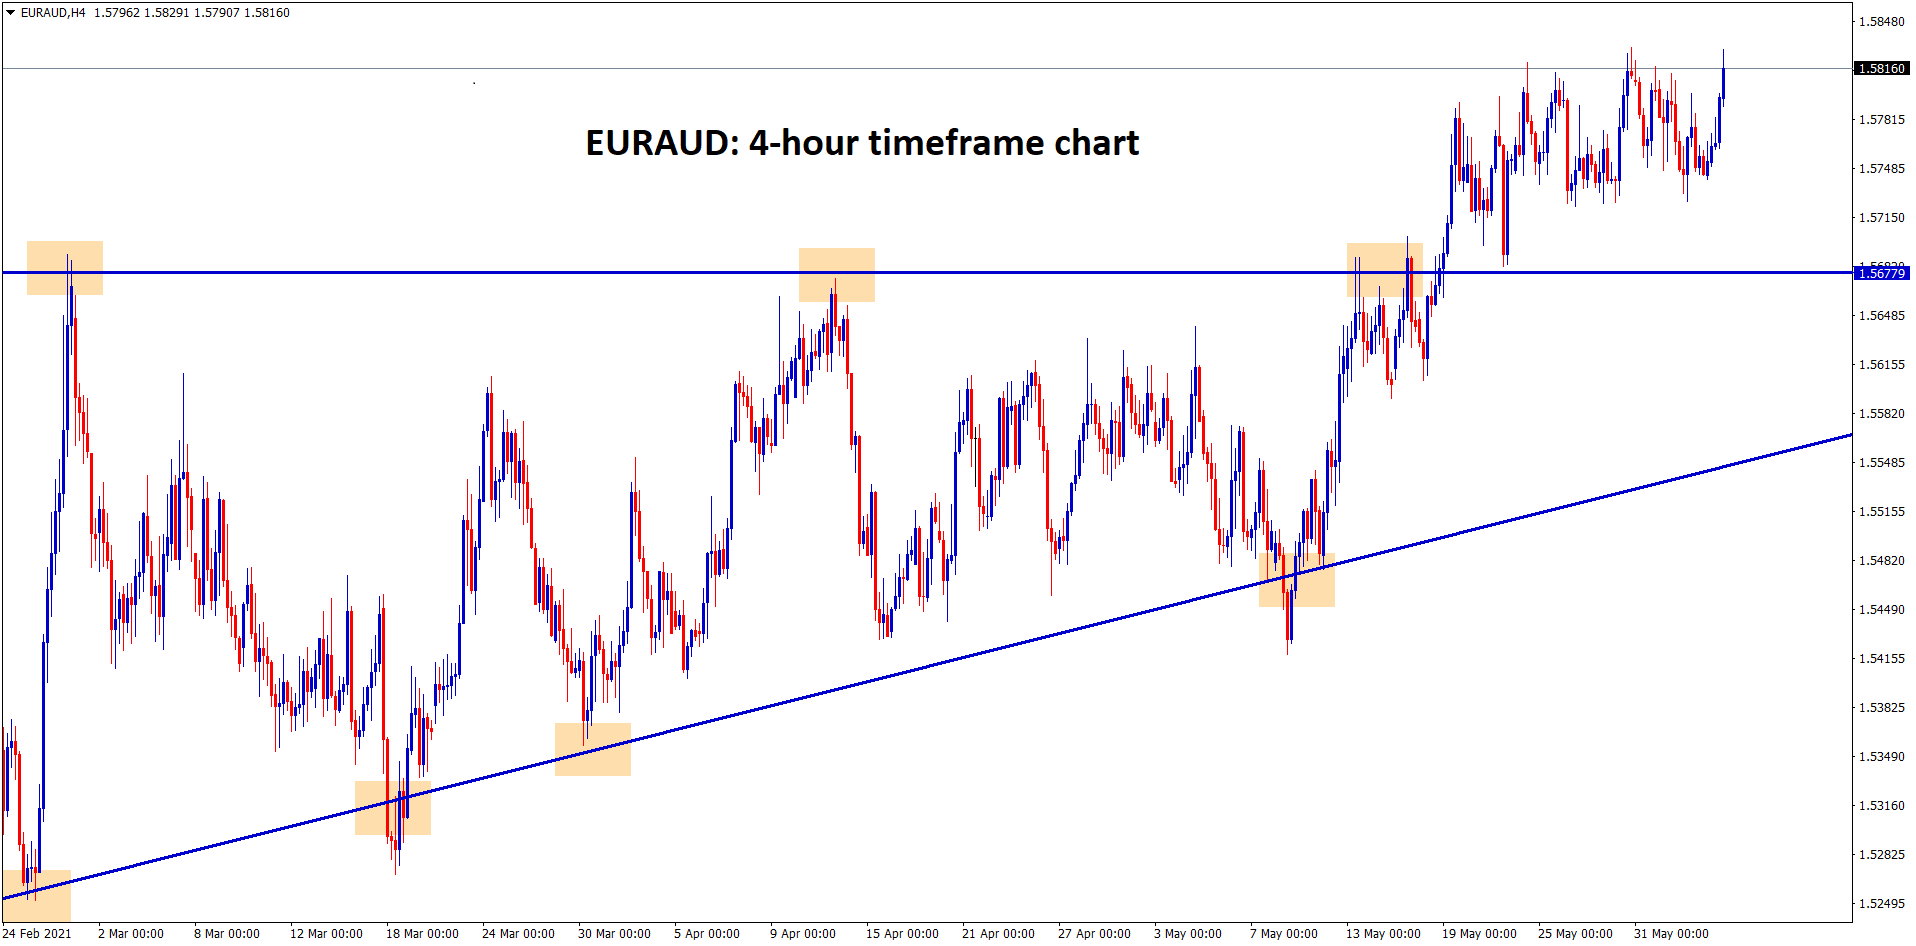 In the higher timeframe view EURAUD has broken the top level of the Ascending Triangle